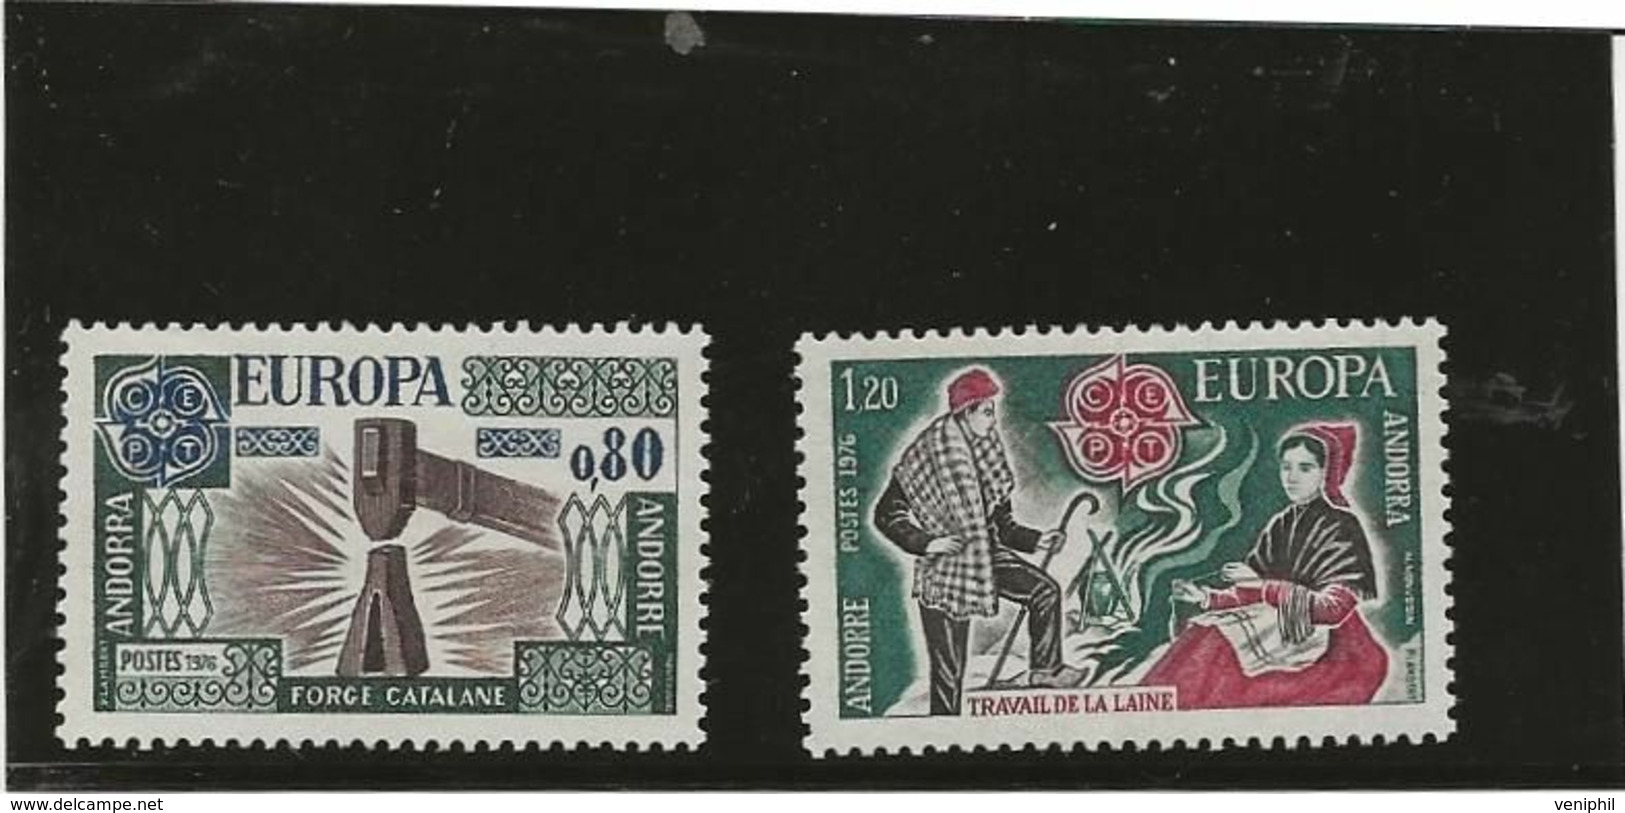 ANDORRE - TIMBRES EUROPA N° 253 Et 254 NEUF SANS CHARNIERE -ANNEE 1976 - COTE : 14,00 € € - Neufs